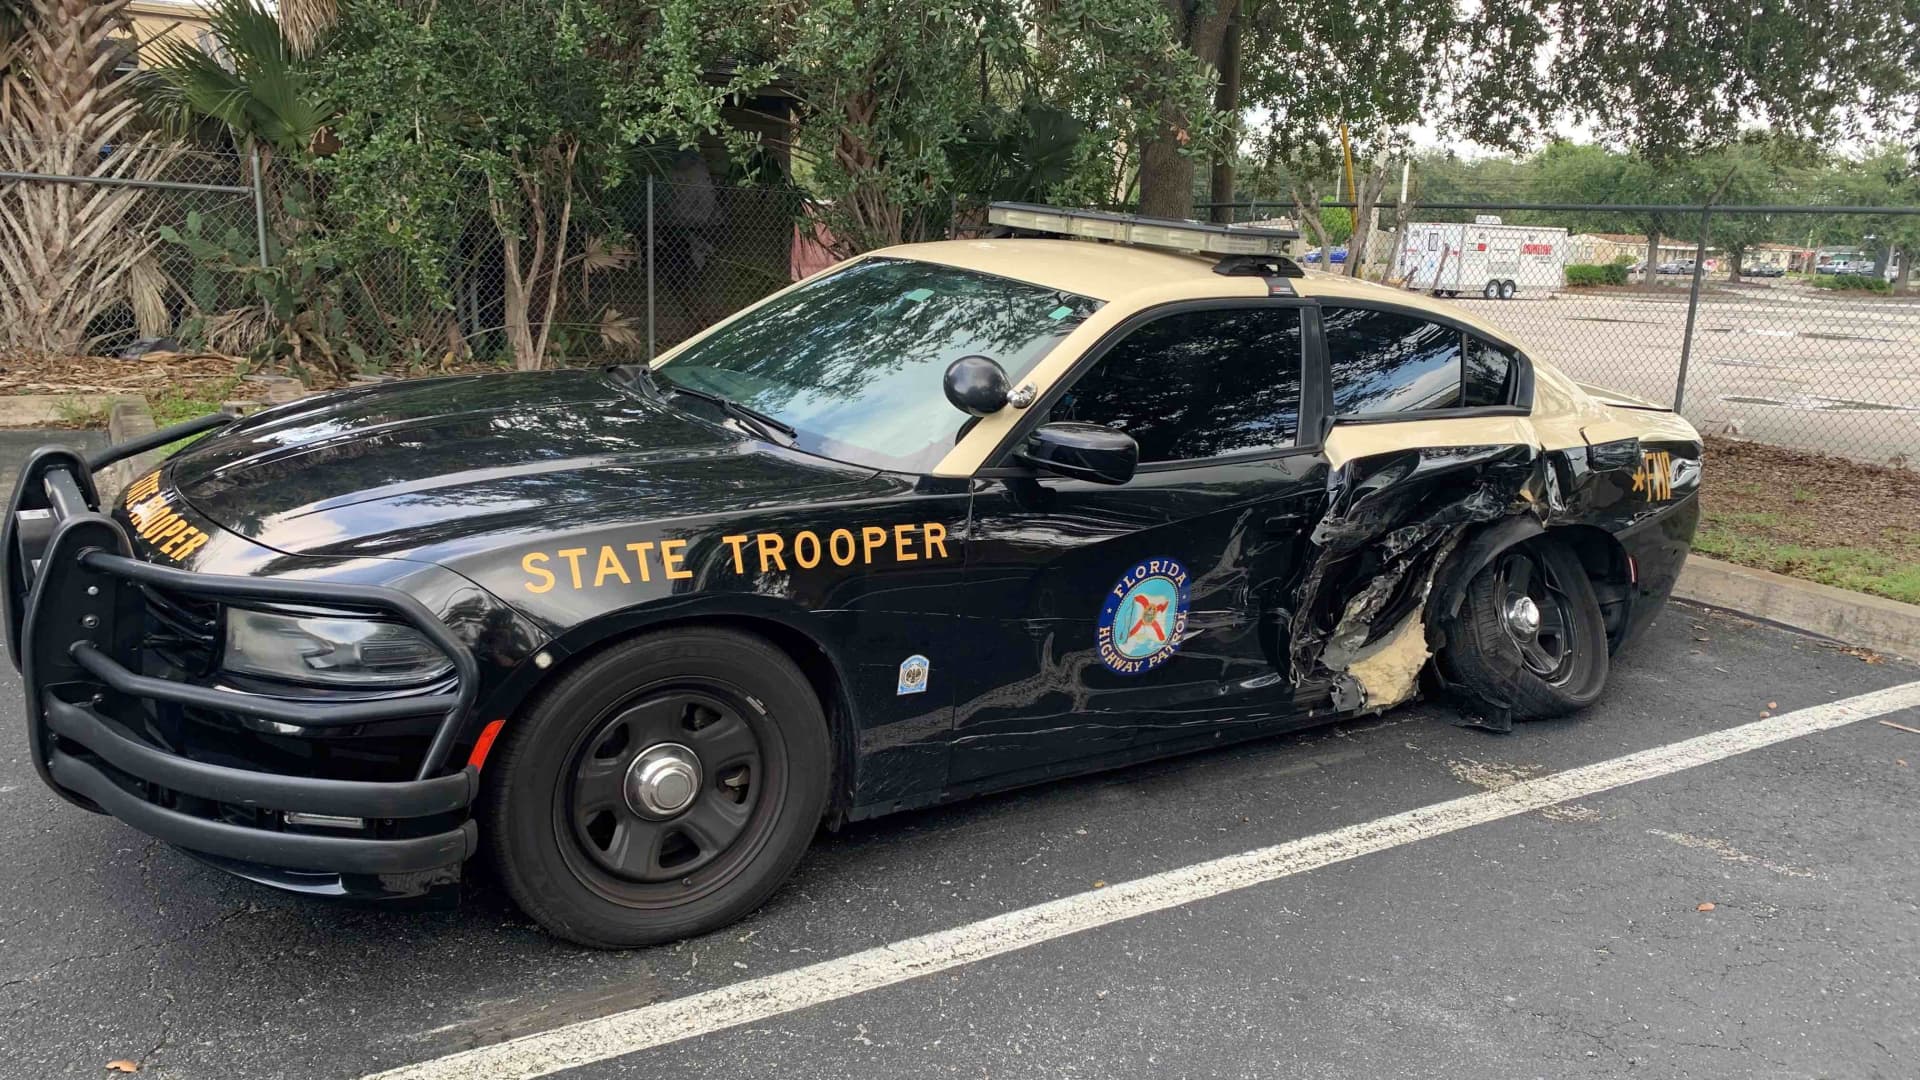 A 2019 Tesla Model 3 driver struck a Florida Highway Patrol car in Orlando, Florida on August 28, 2021. The driver told police she was using Autopilot at the time of the crash.